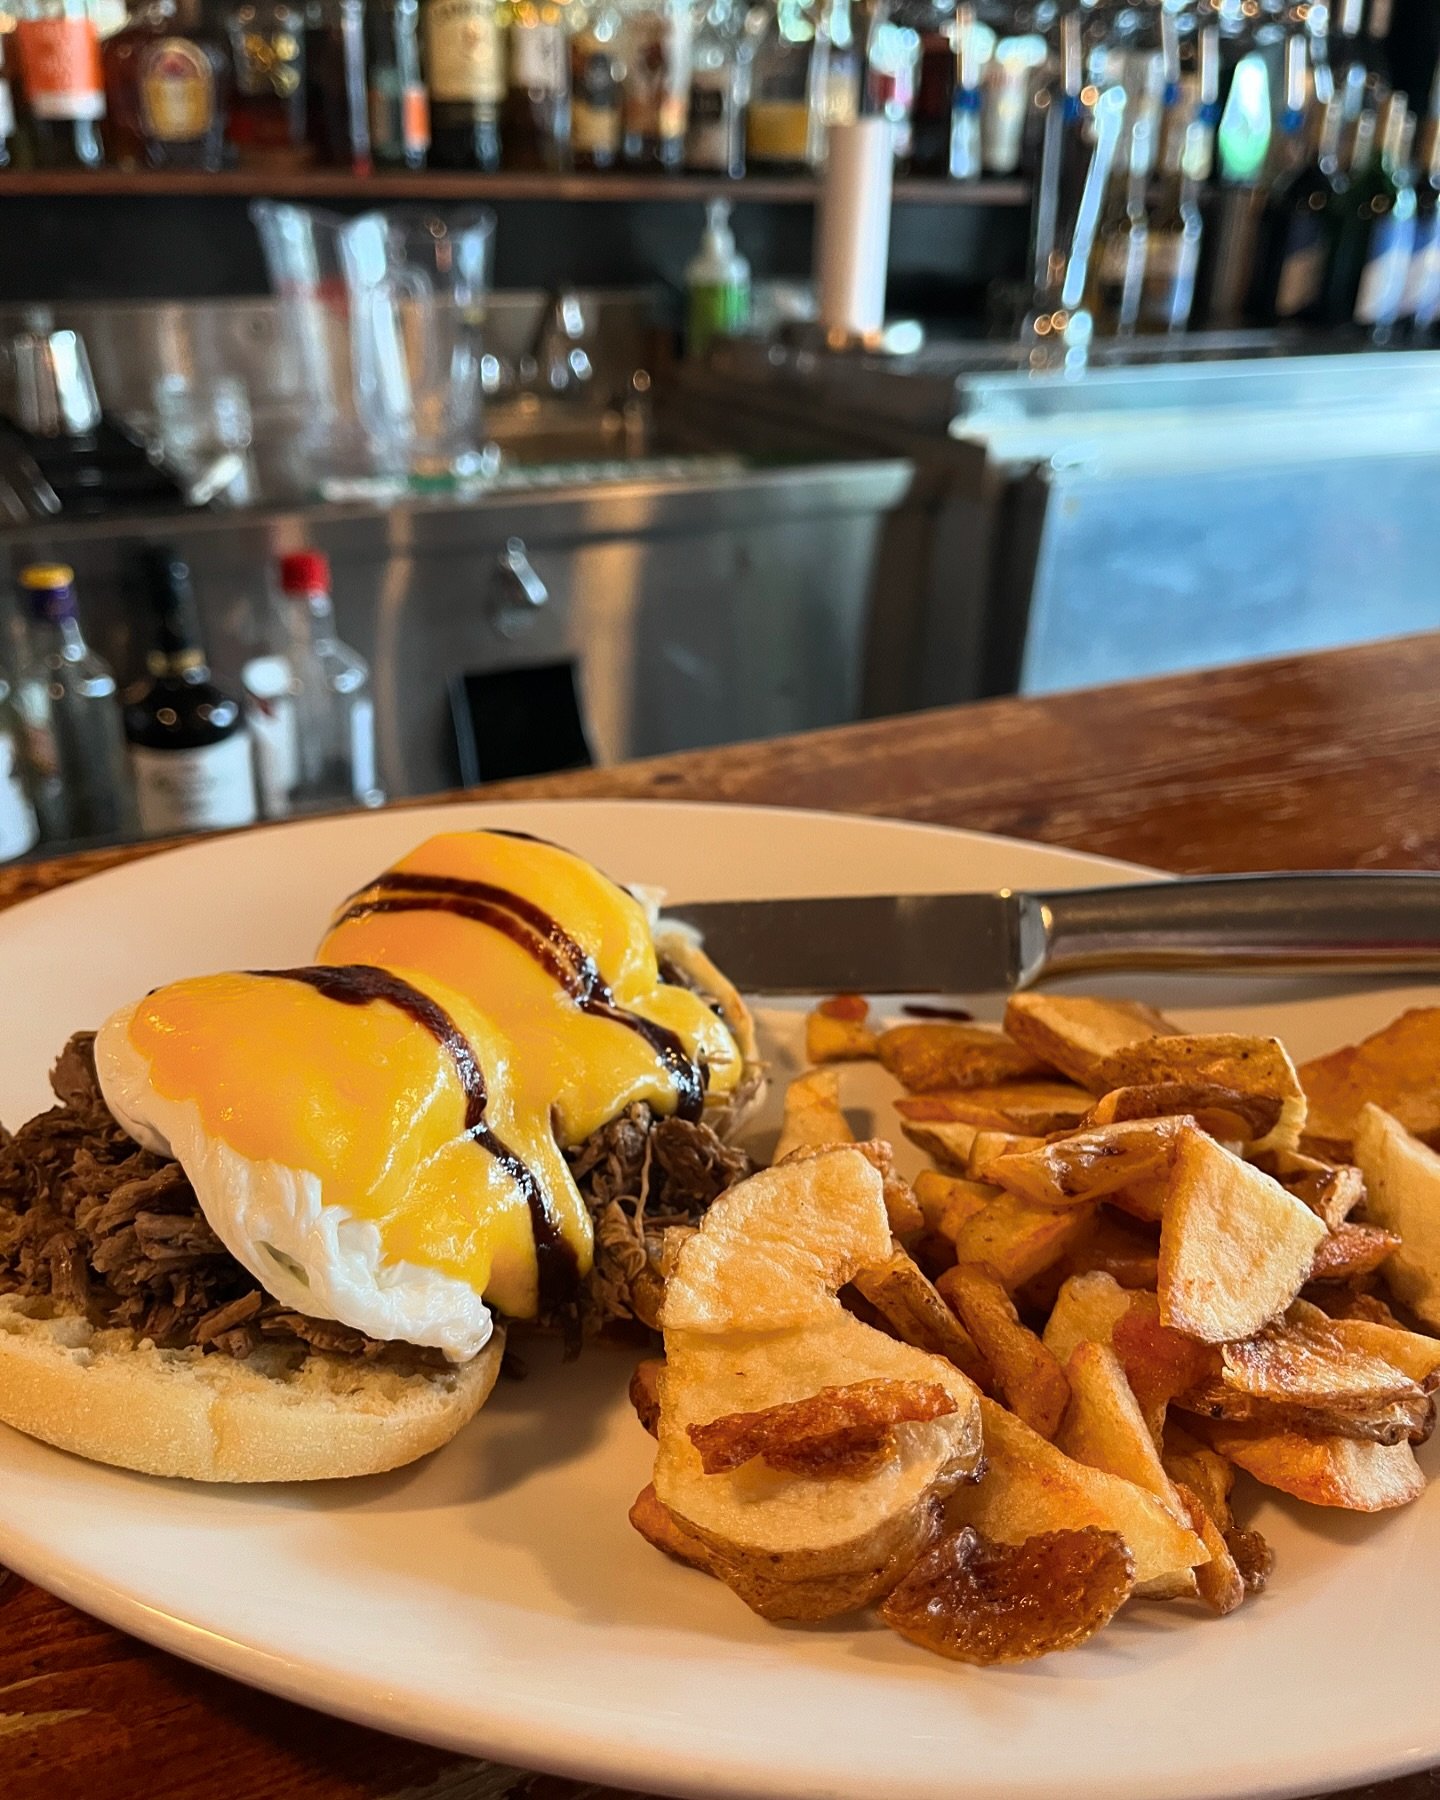 BBQ Braised Beef Benny 🍳

~English muffin topped with braised beef, barbecue sauce, 2 poached medium eggs and fresh hollandaise~

Eggs Benedict are offered on Saturdays and Sundays from ~10am to when we sell out (which has recently been before noon,